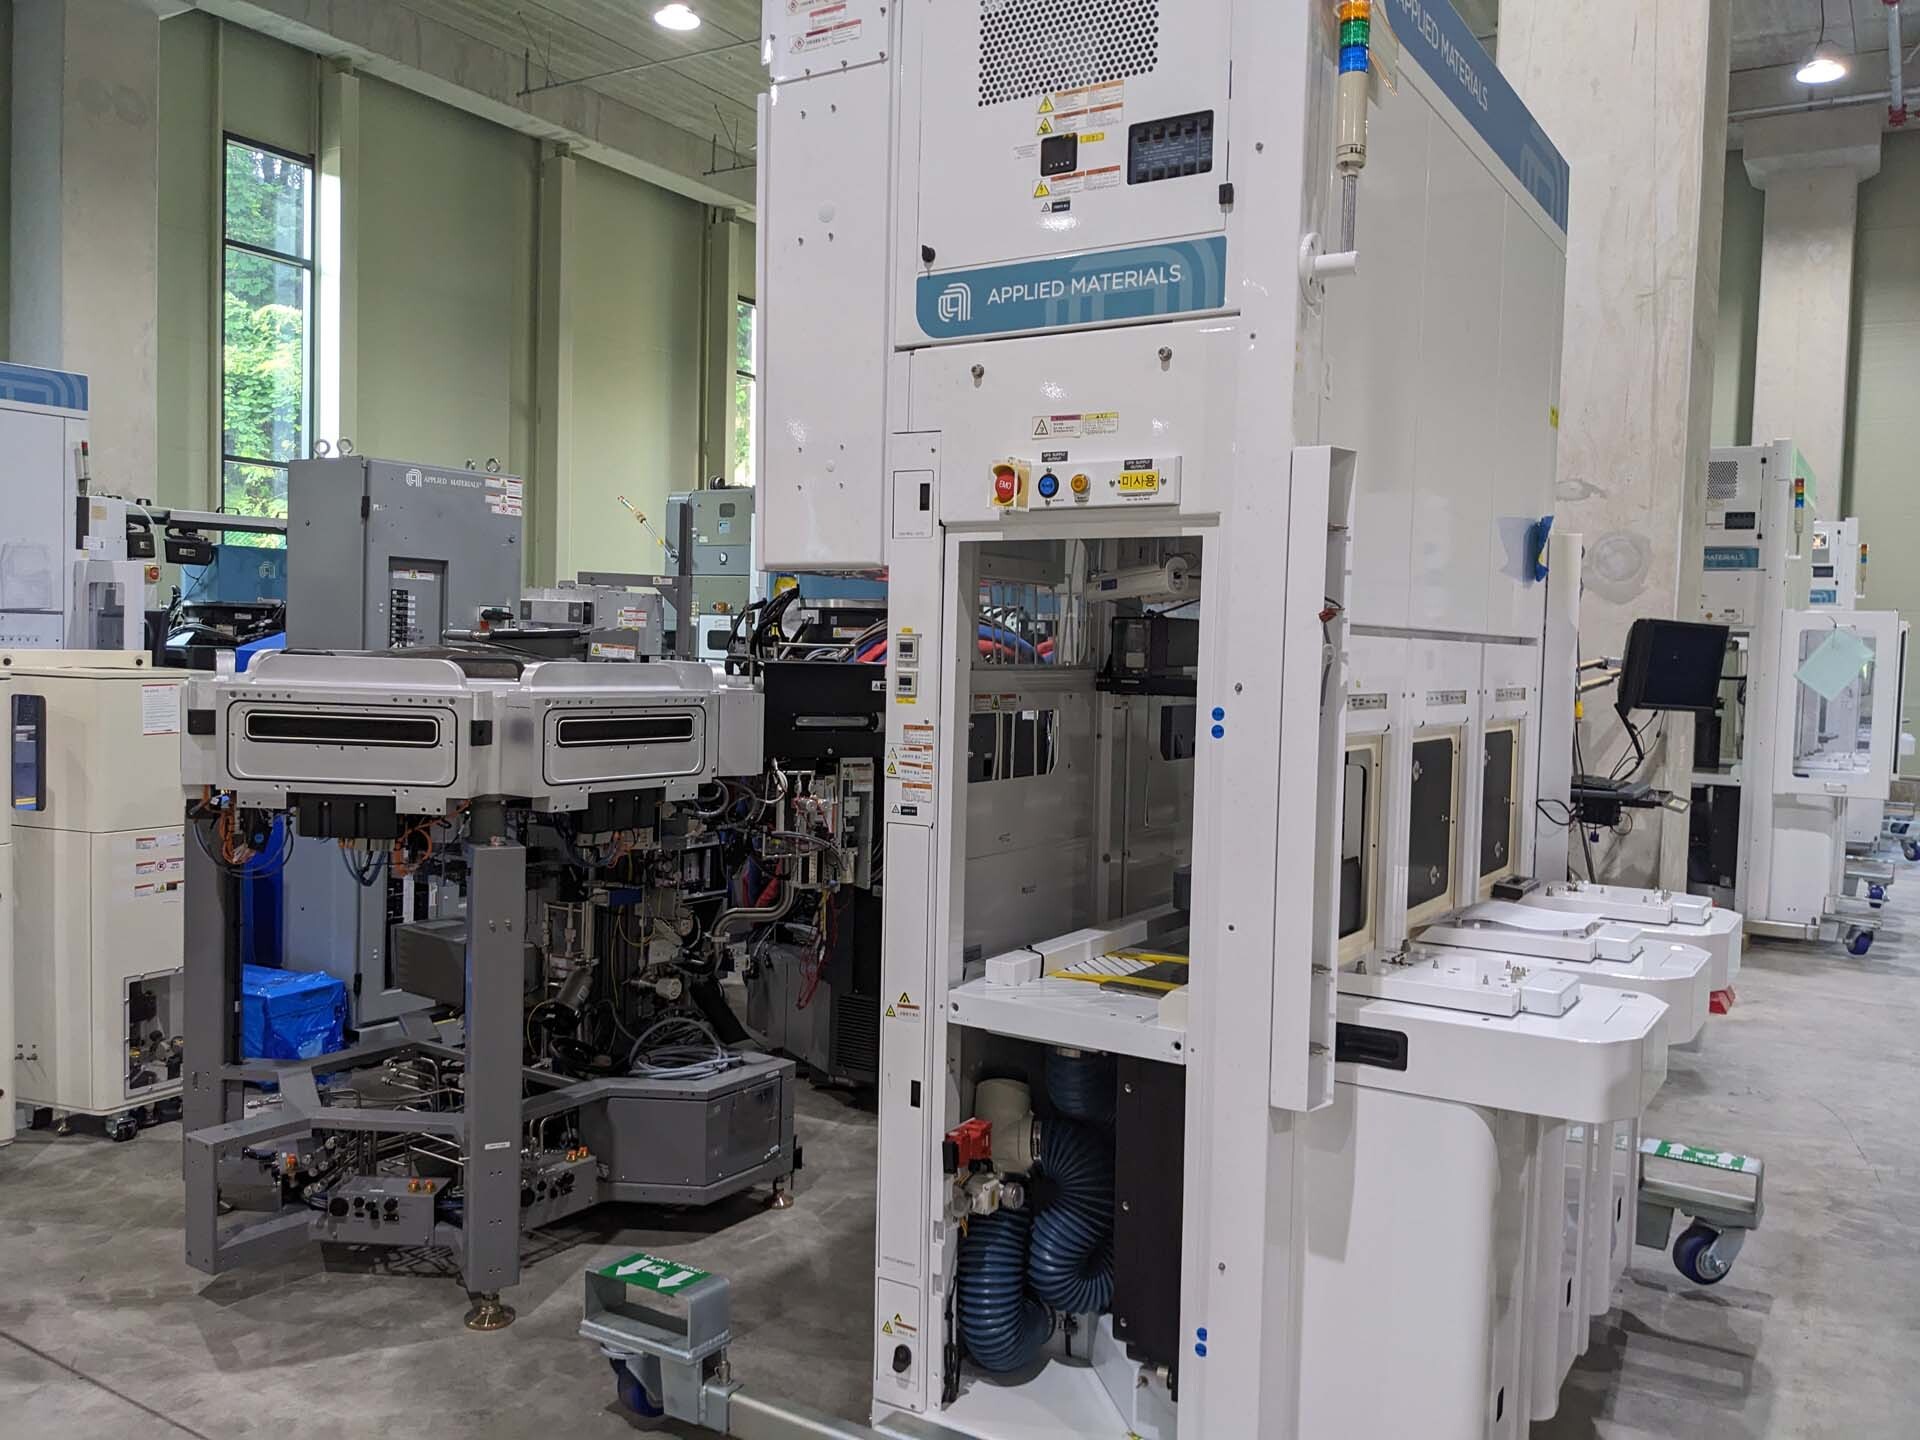 Photo Used AMAT / APPLIED MATERIALS Centura DPS G5 For Sale